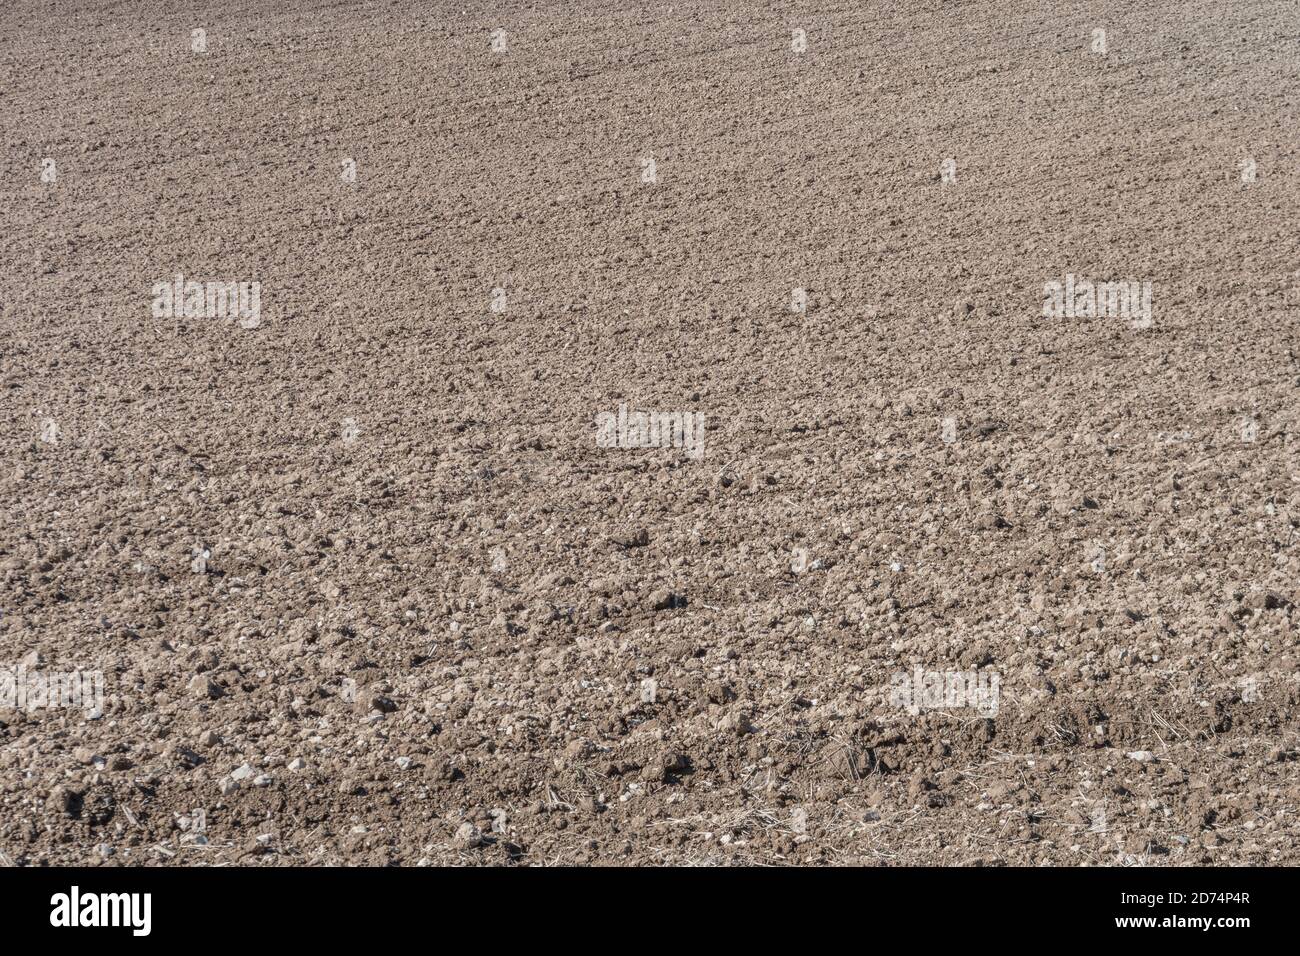 Field of prepared soil and planted crop seeds. Metaphor farming and agriculture UK, growing crops, soil science, soil types, soil preparation. Stock Photo